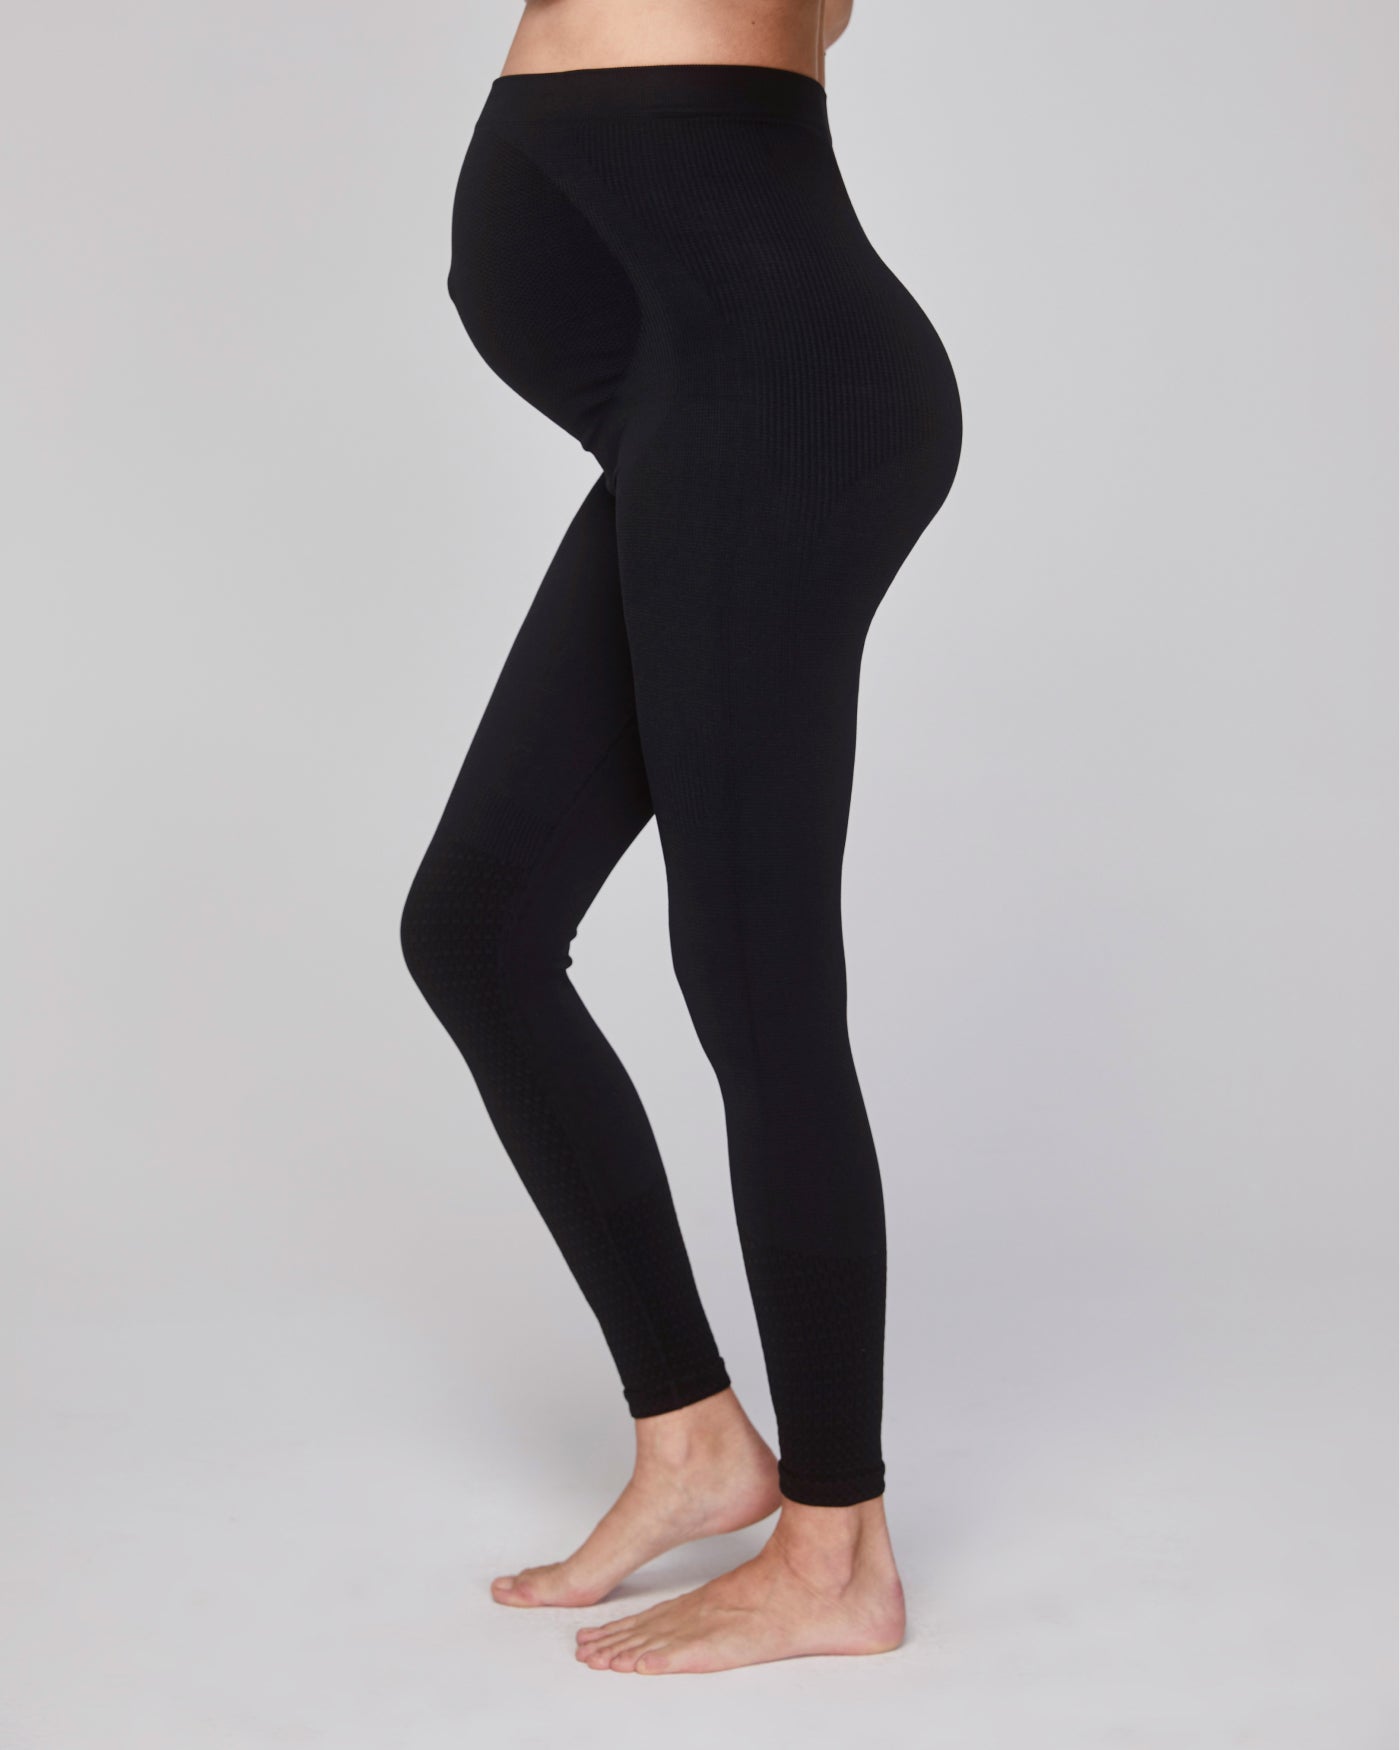 High Waisted Seamless Maternity Workout Leggings For Women